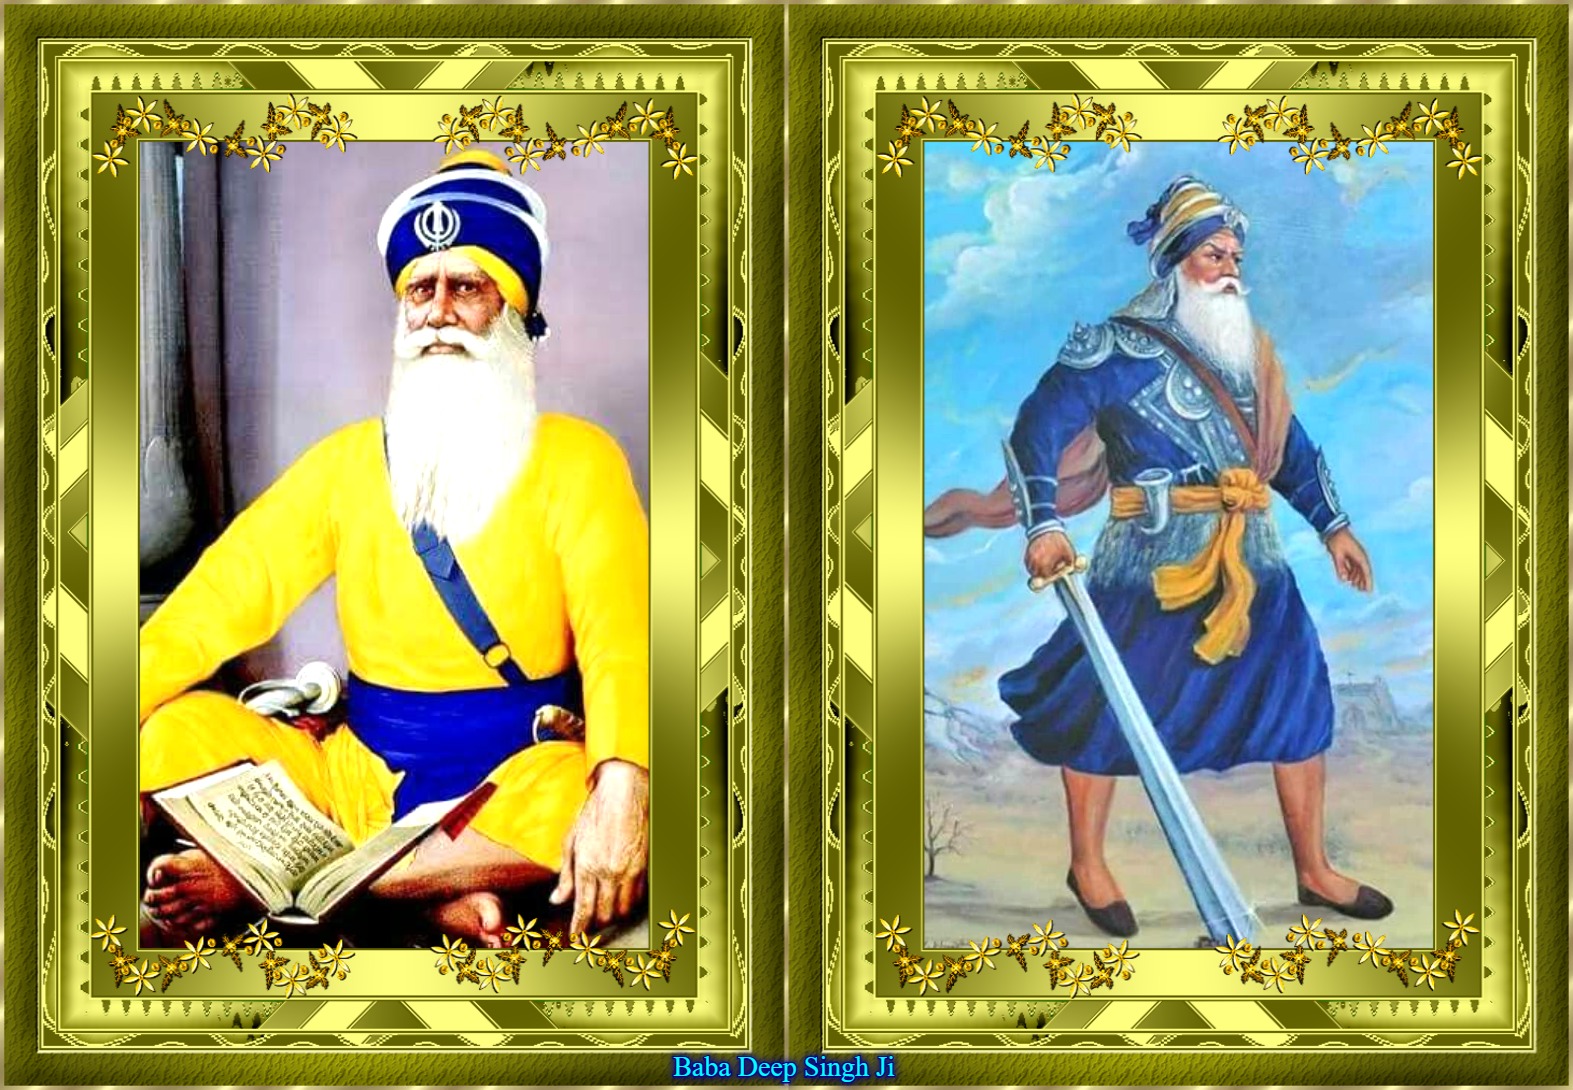 You are currently viewing “Rich Tributes to General & Martyr Baba Deep Singh”